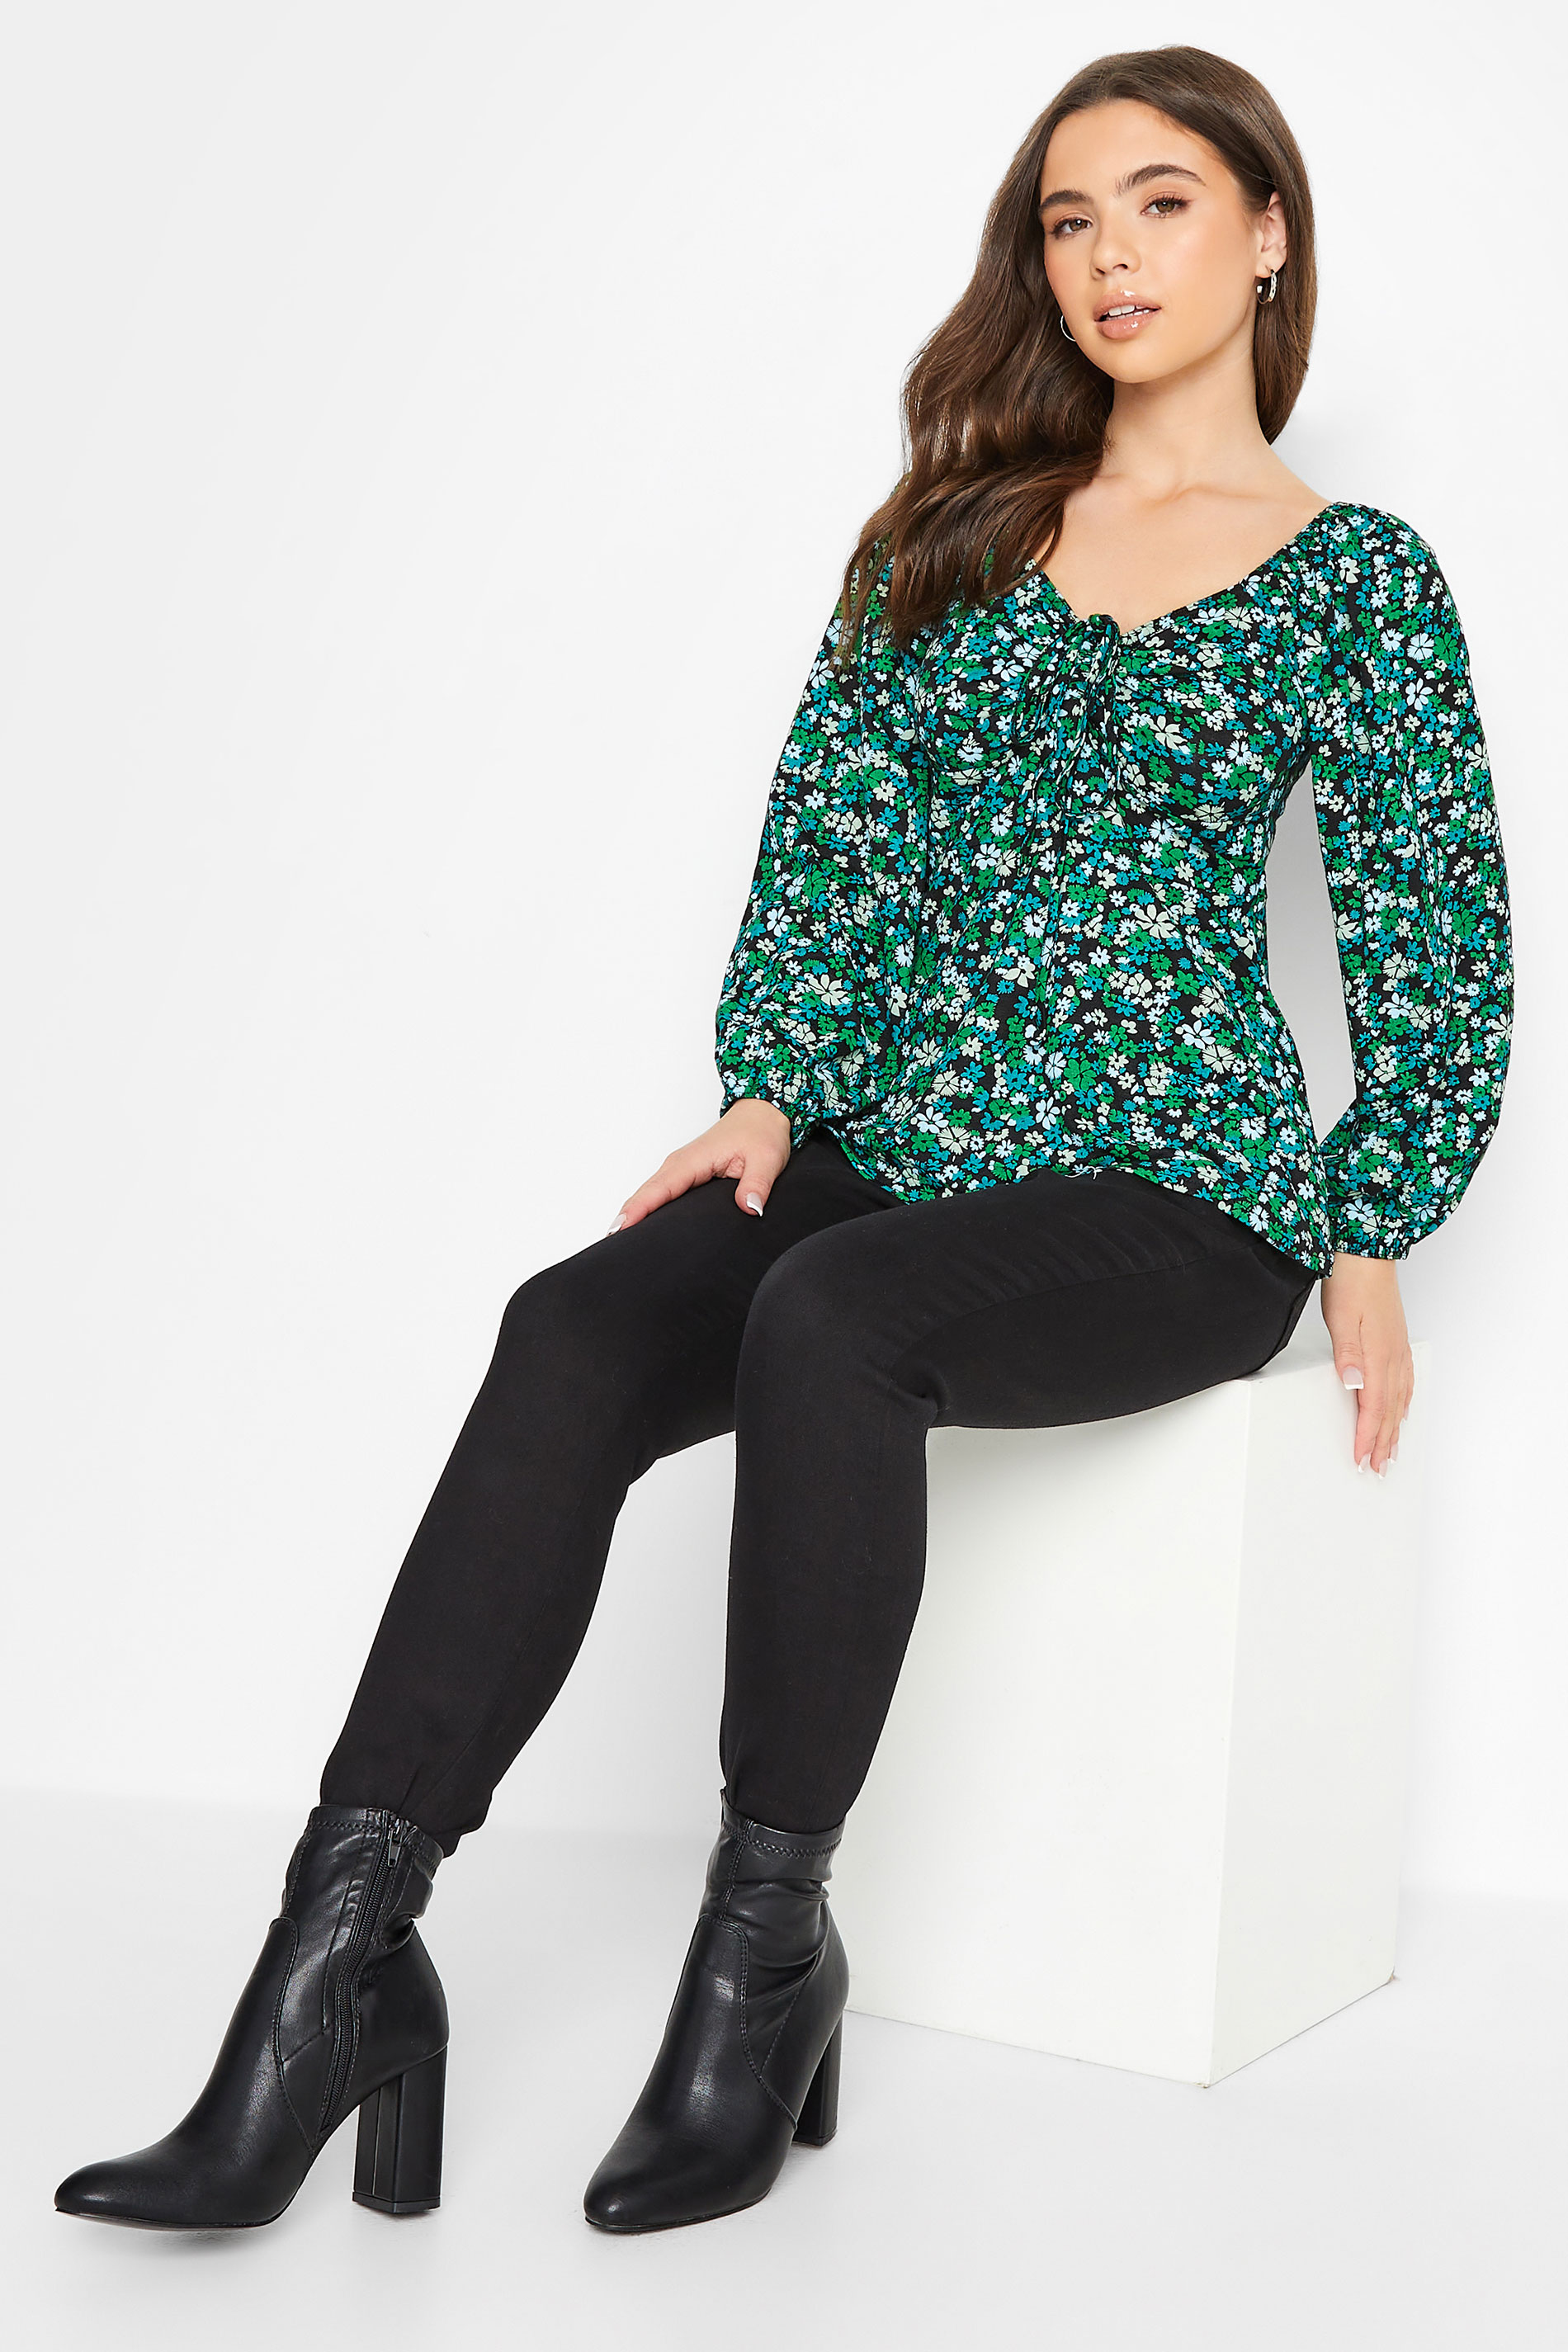 Petite Green Ditsy Print Ruched Front Top | PixieGirl 2